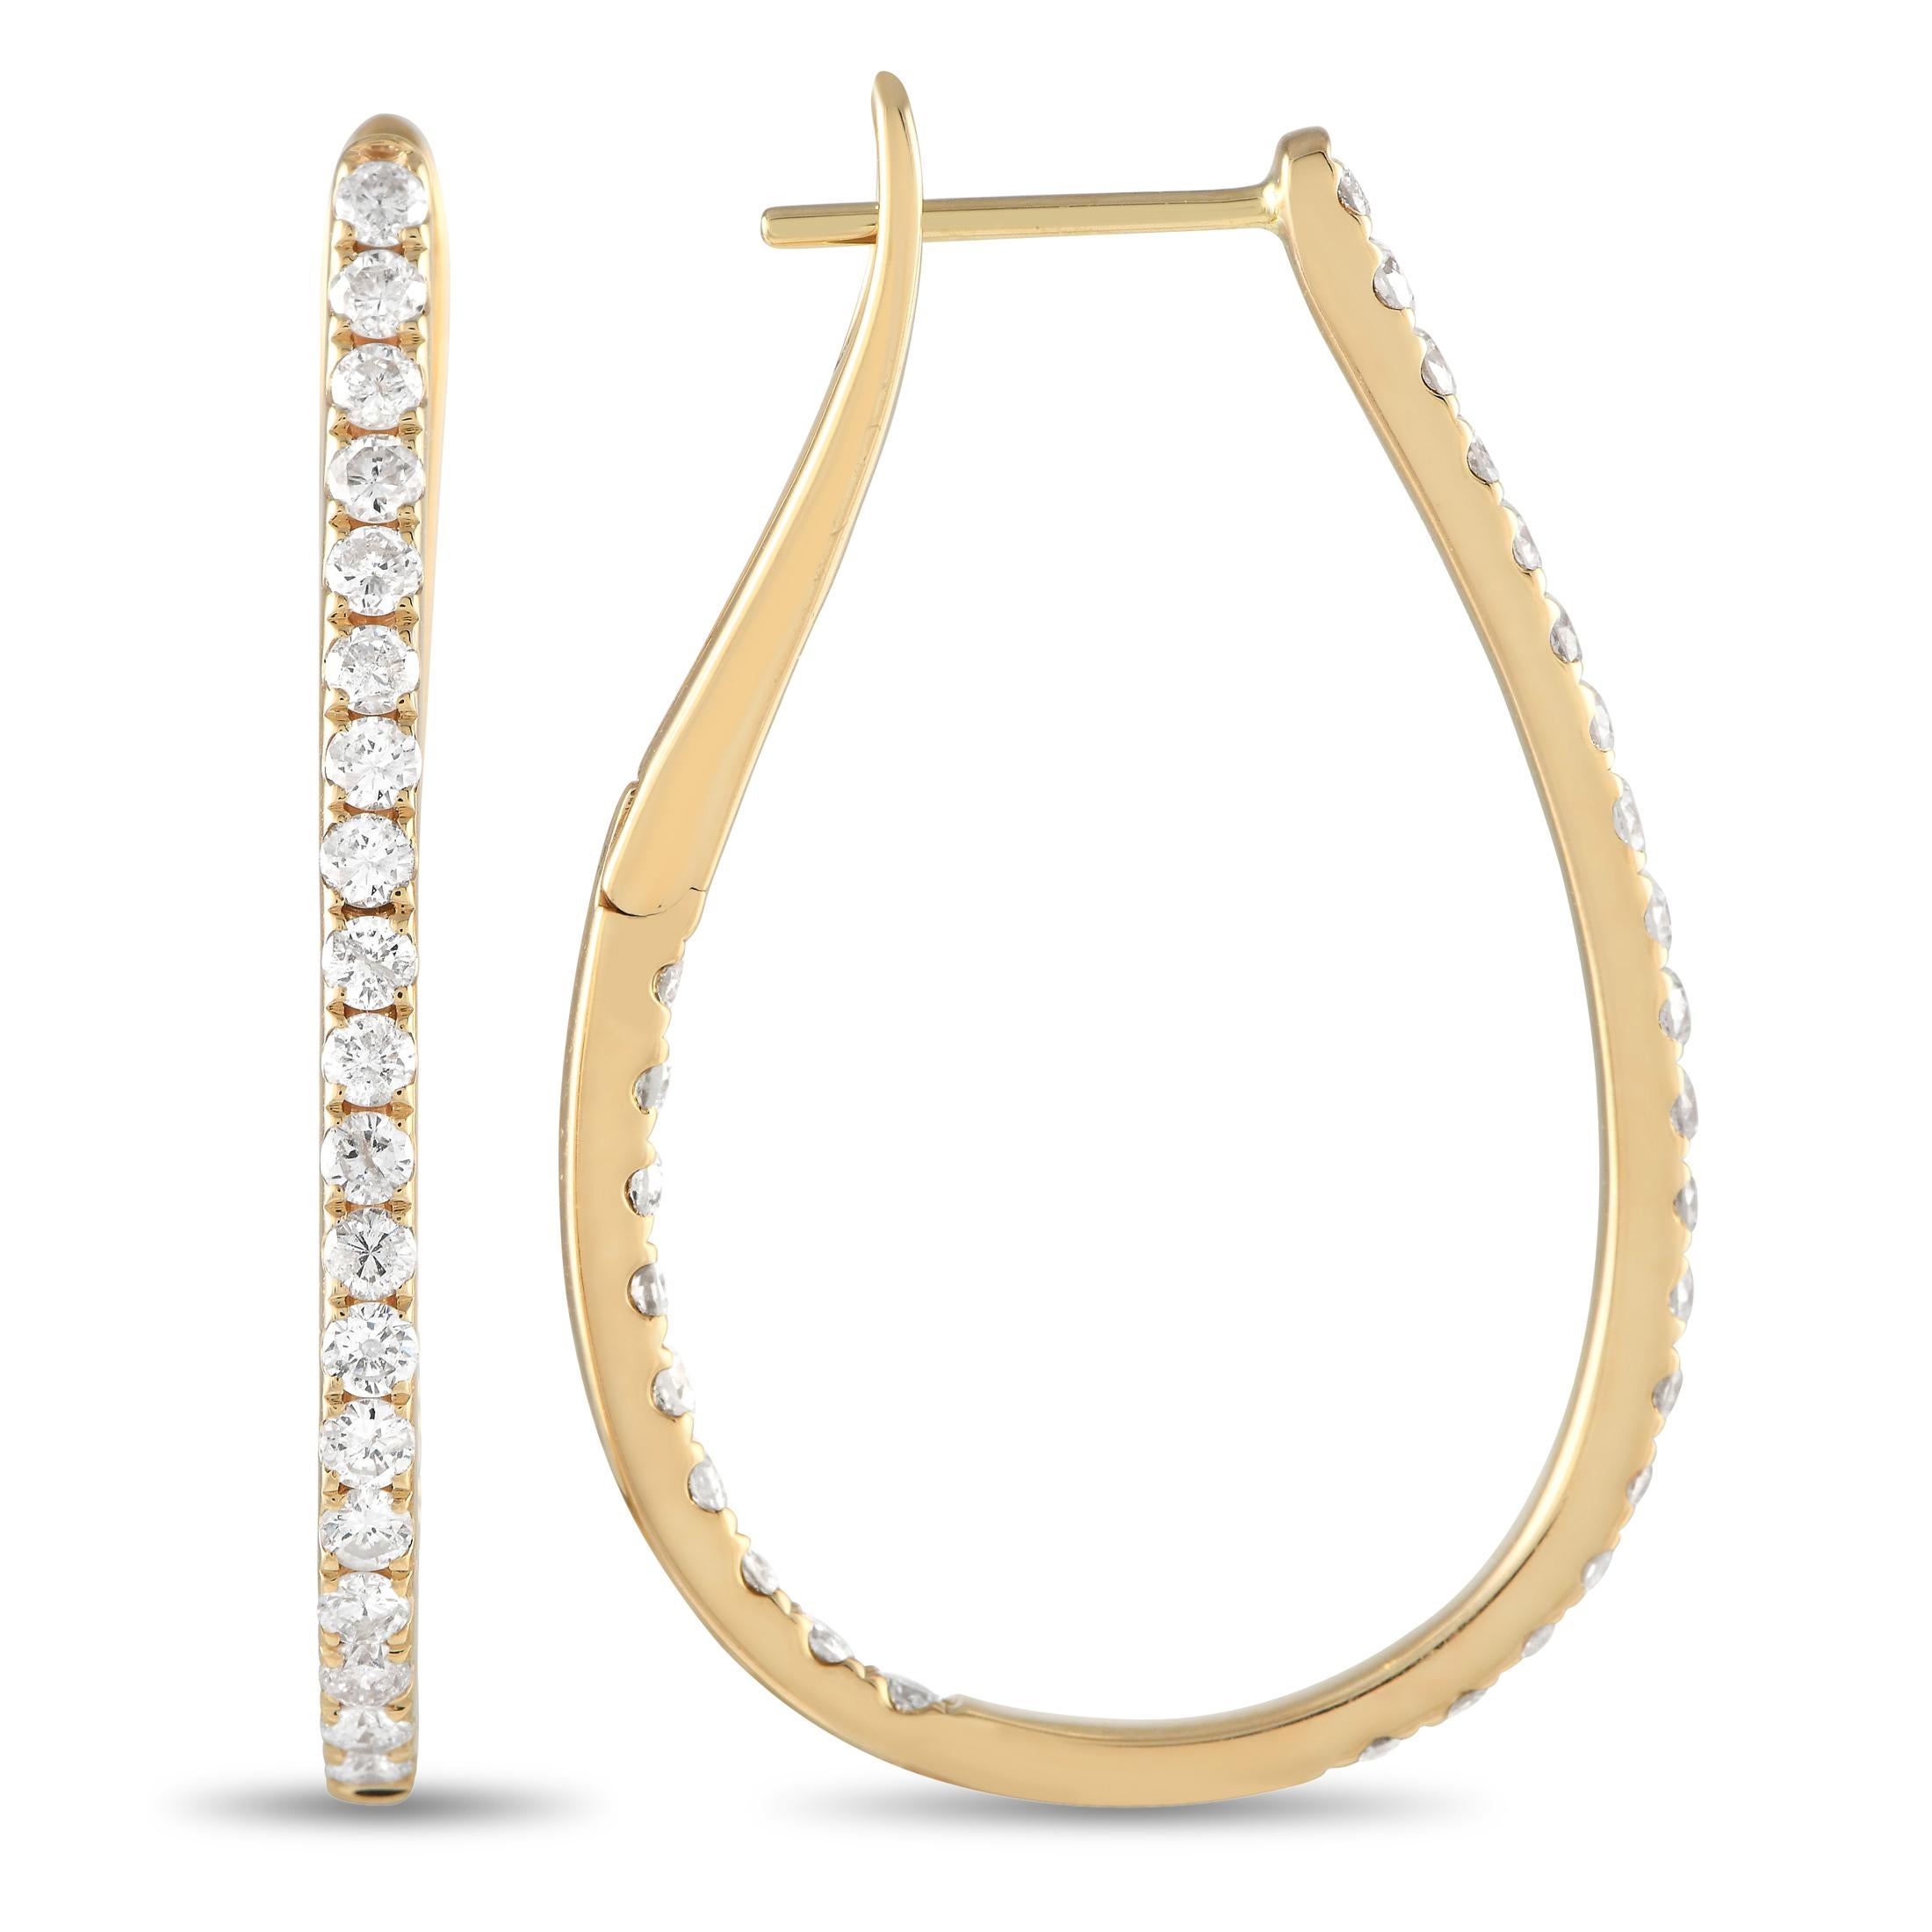 These earrings are truly timeless in design. Diamonds with a total weight of 2.0 carats make them a luxury piece that will continually catch the light. Each one is crafted from 14K yellow gold and measures 1.15 long by 1.0 wide.This jewelry piece is